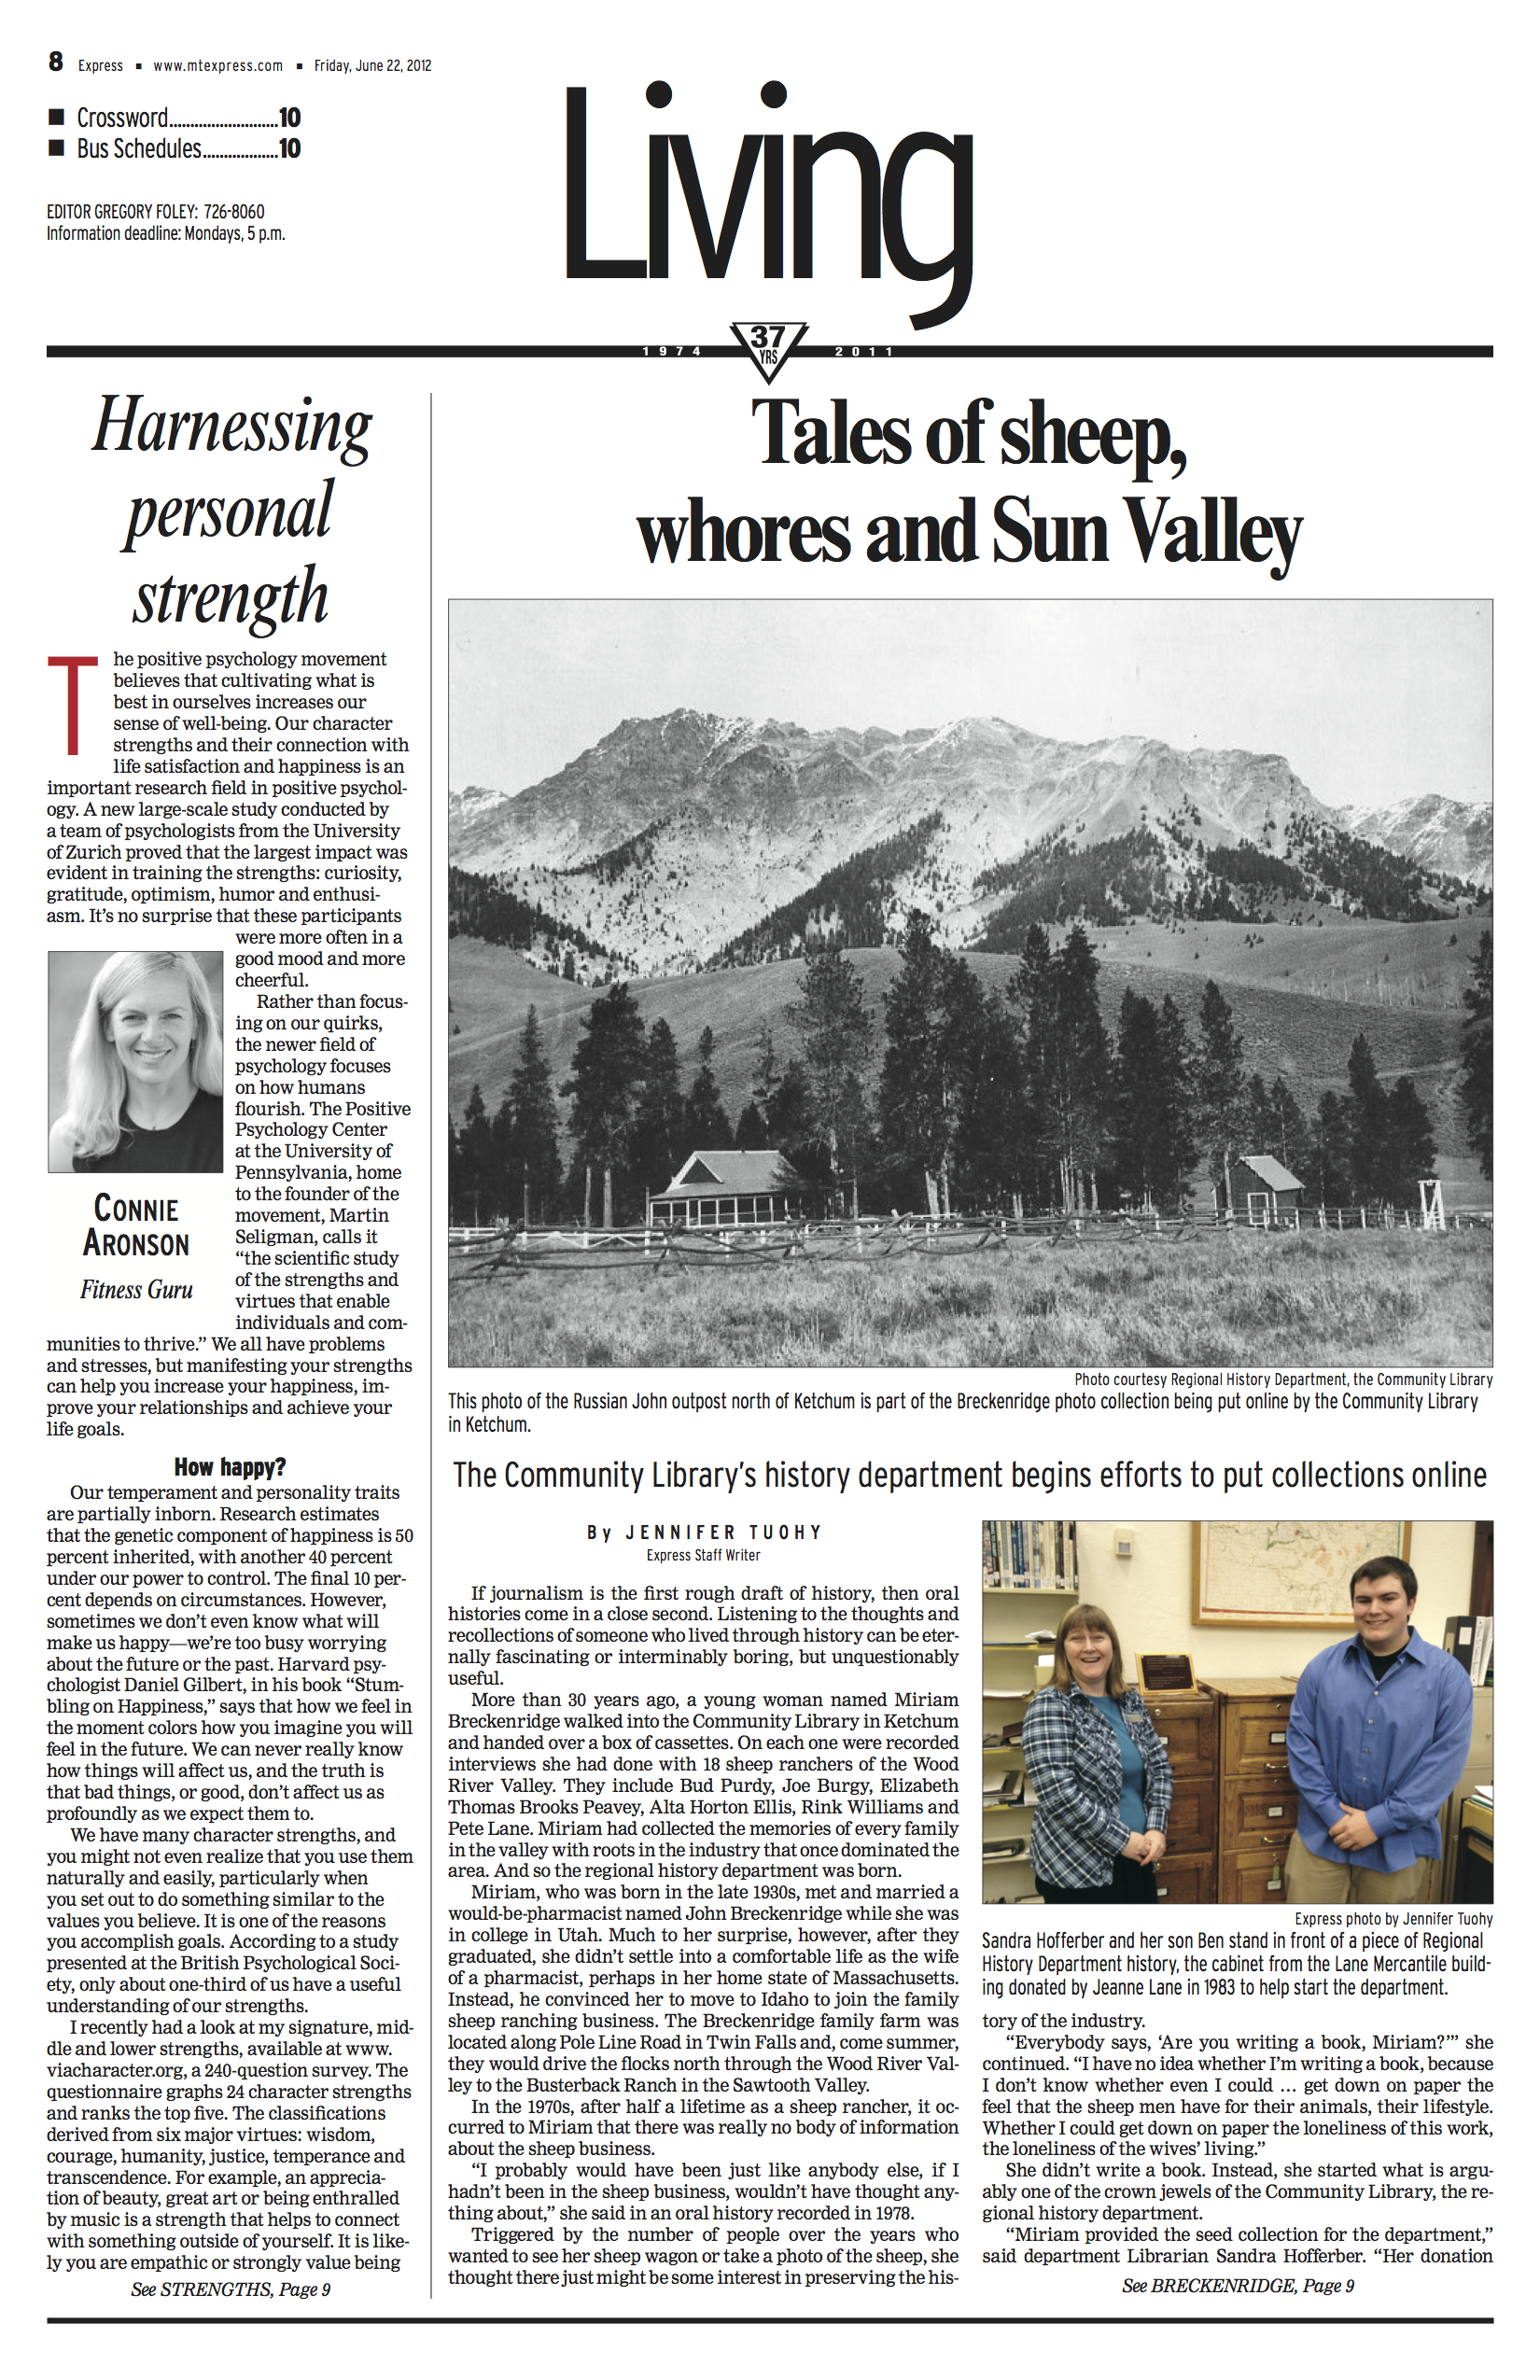 Tales of Sheep, Whores and Sun Valley